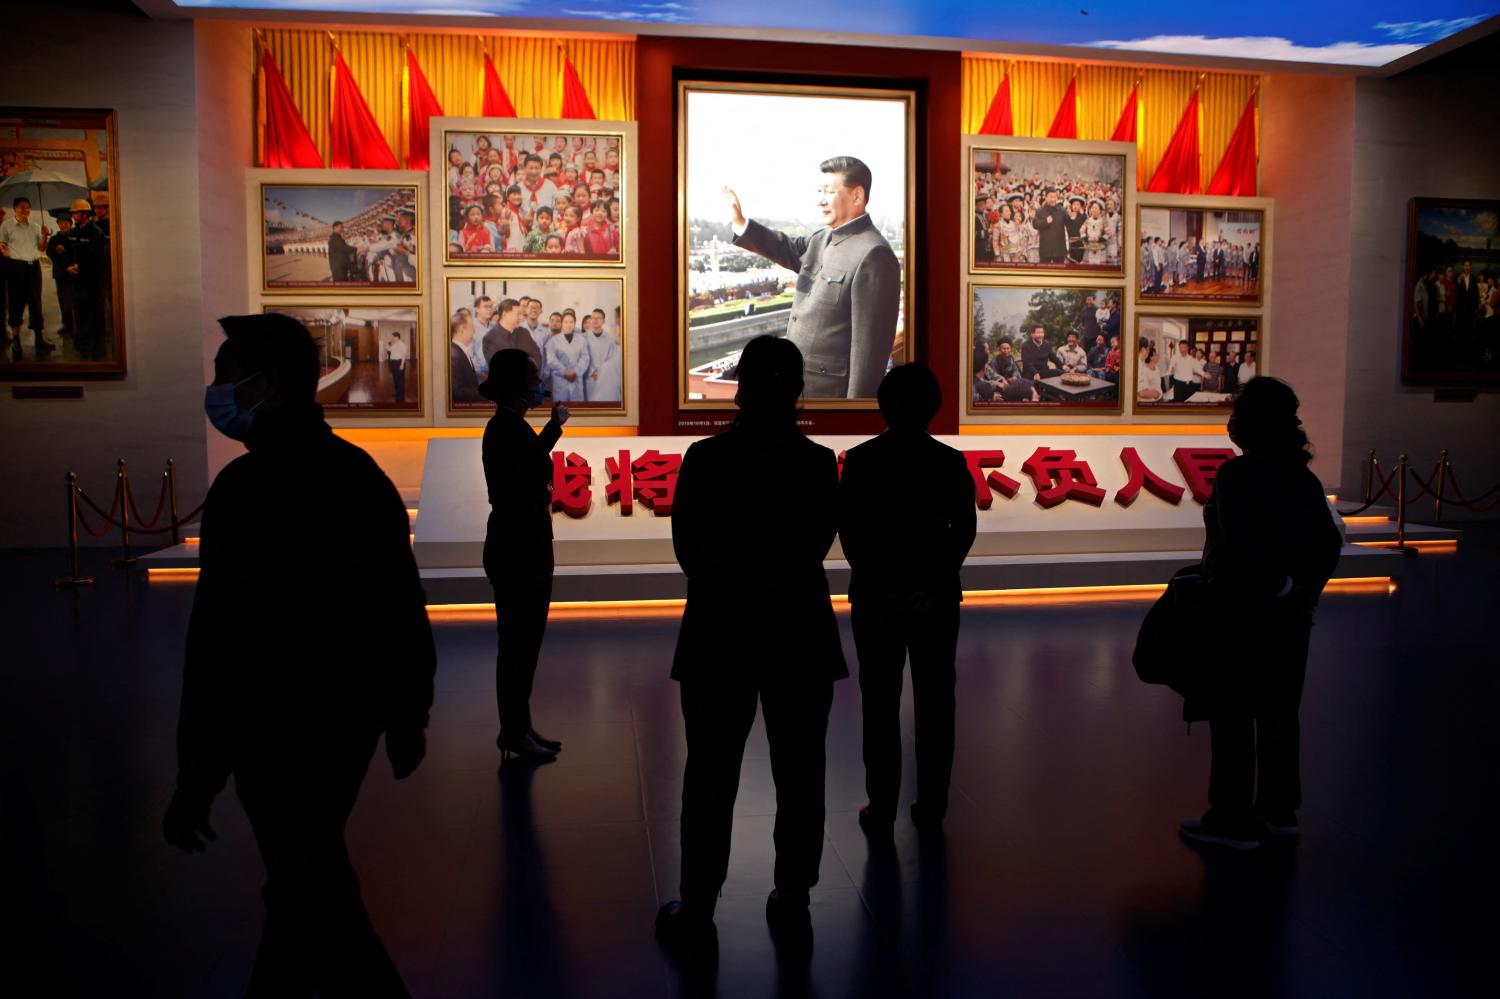 A guide talks to visitors in front of images of Chinese President Xi Jinping, at the Museum of the Communist Party of China in Beijing, China October 13, 2022. REUTERS/Florence Lo